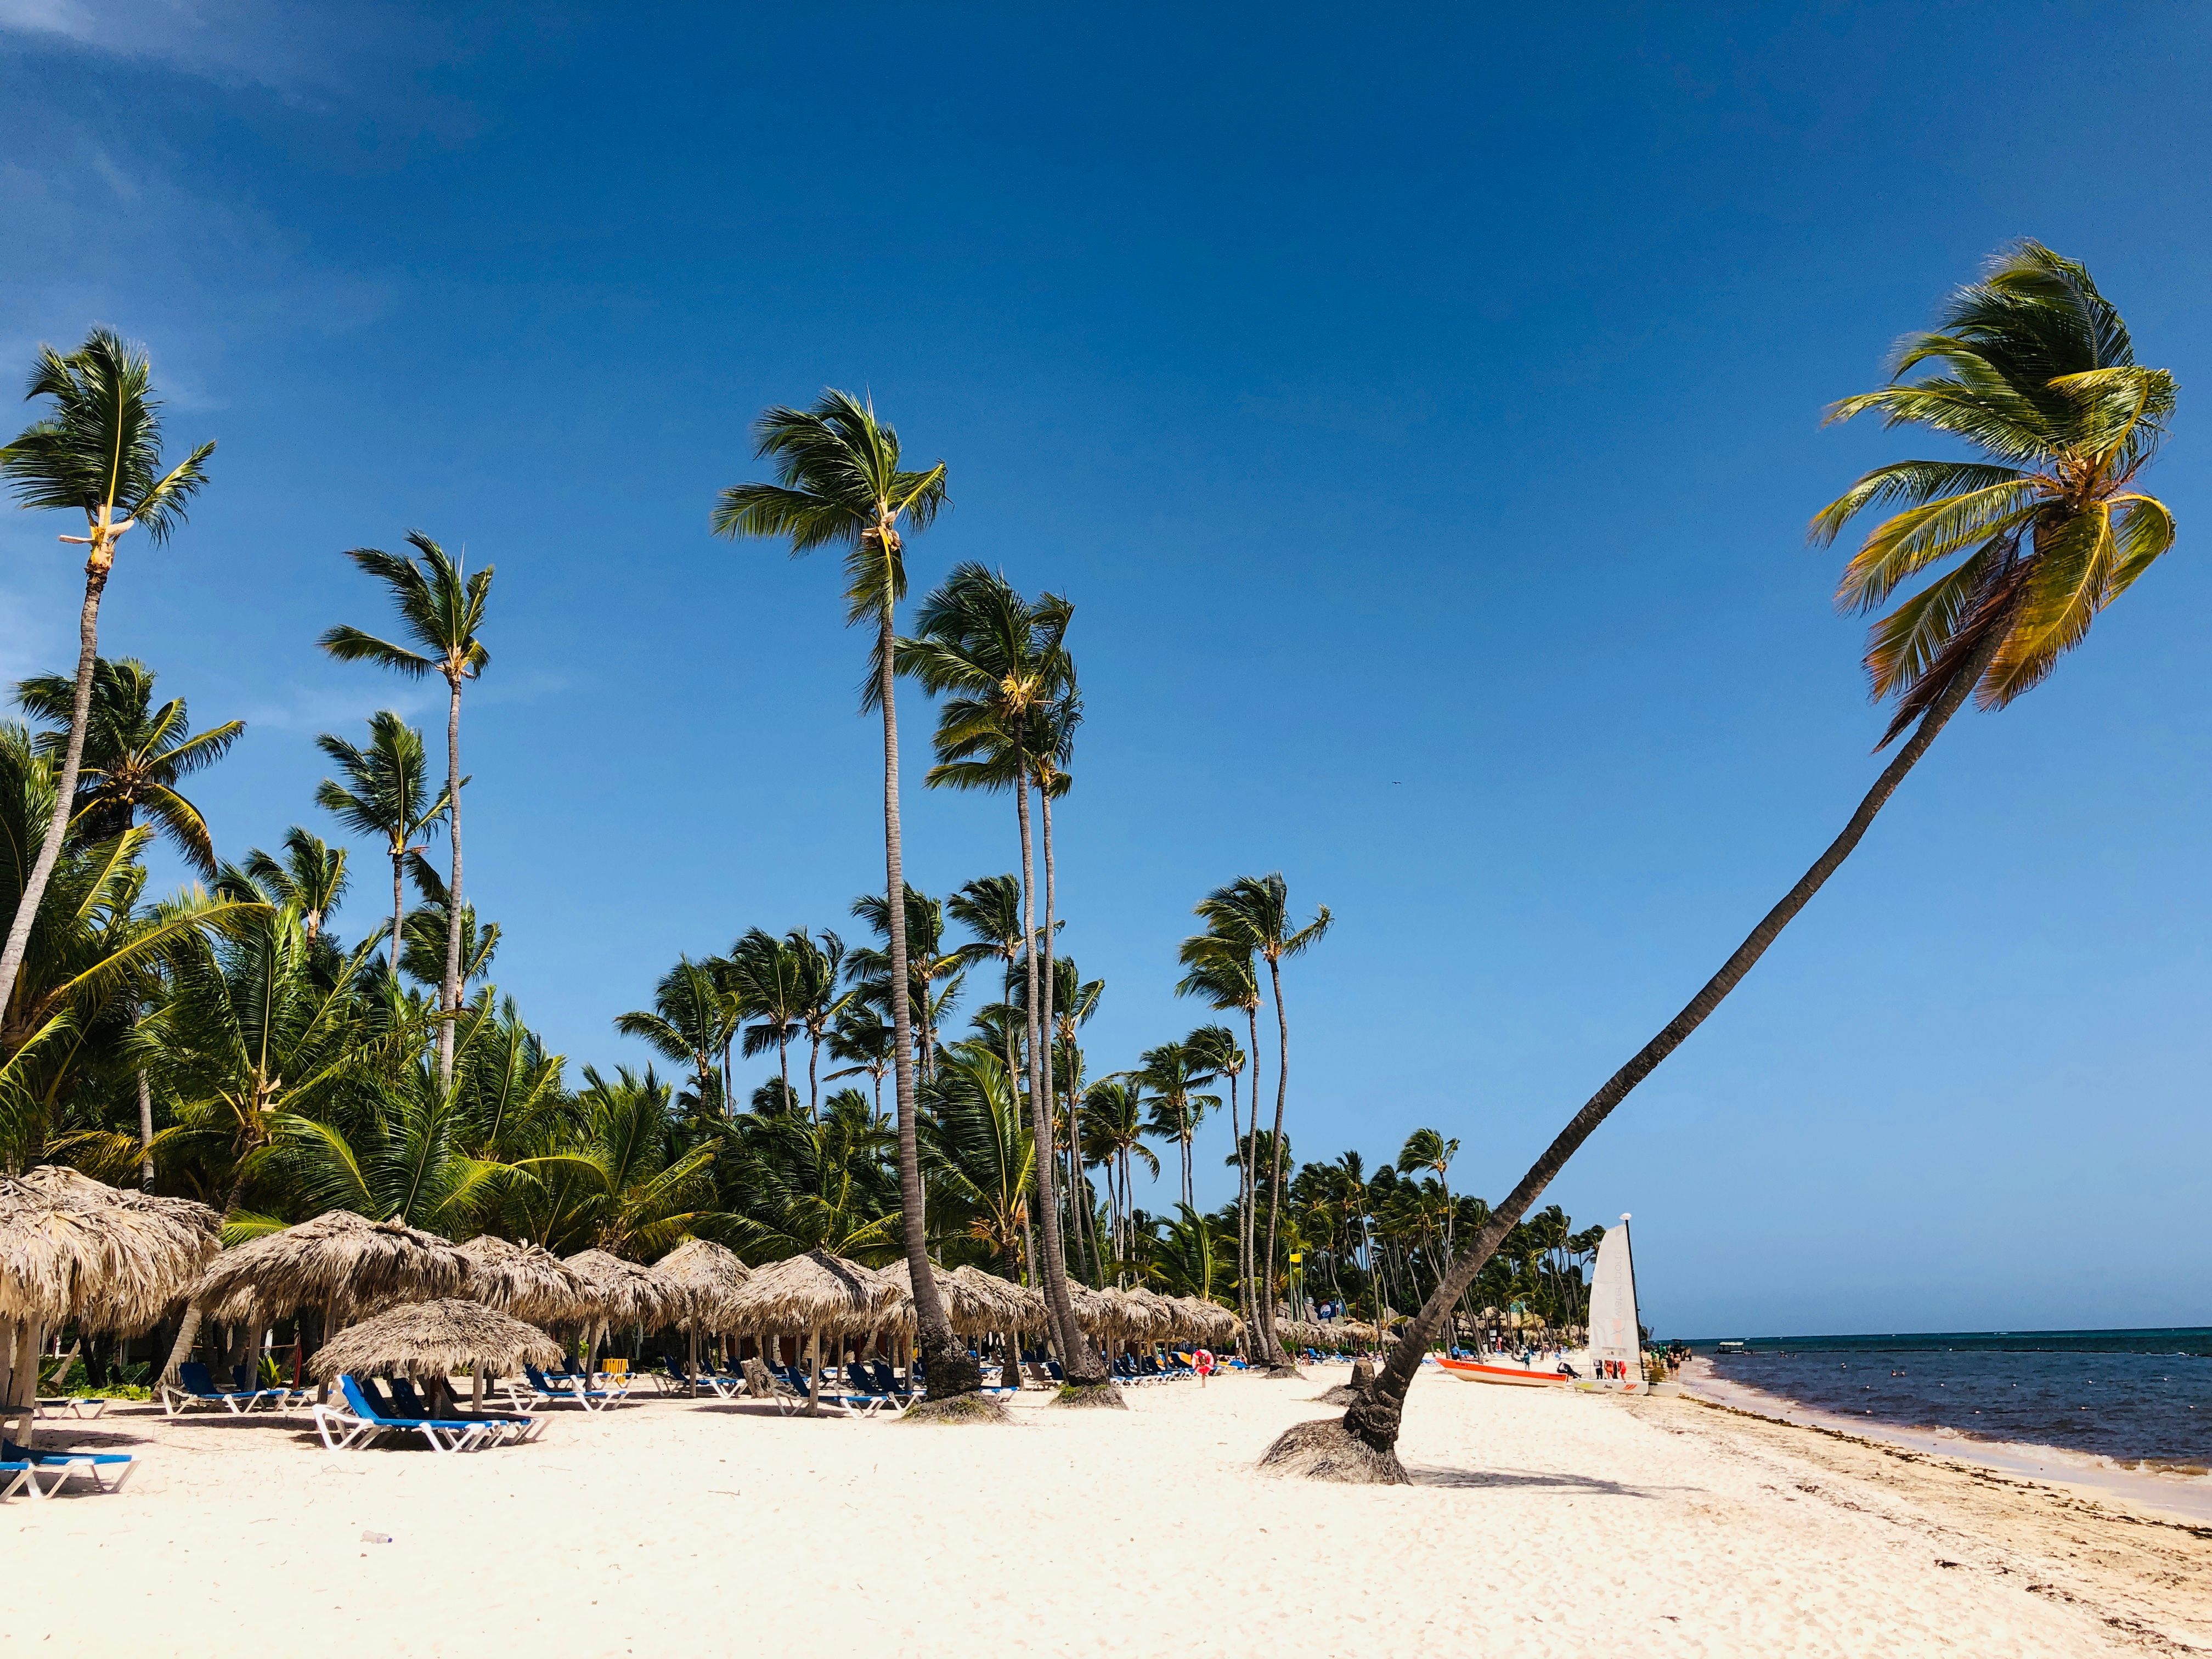 View of the beach of Hotel Barcelo taken in Punta Cana on August 2, 2019. - Punta Cana, the easternmost tip of the Dominican Republic, abuts the Caribbean Sea and the Atlantic Ocean. It's a region known for its 32km stretch of beaches and clear waters. The Bávaro area and Punta Cana combine to form what's known as La Costa del Coco, or the Coconut Coast, an area of all-inclusive tourist resorts. (DANIEL SLIM&mdash;AFP/Getty Images)